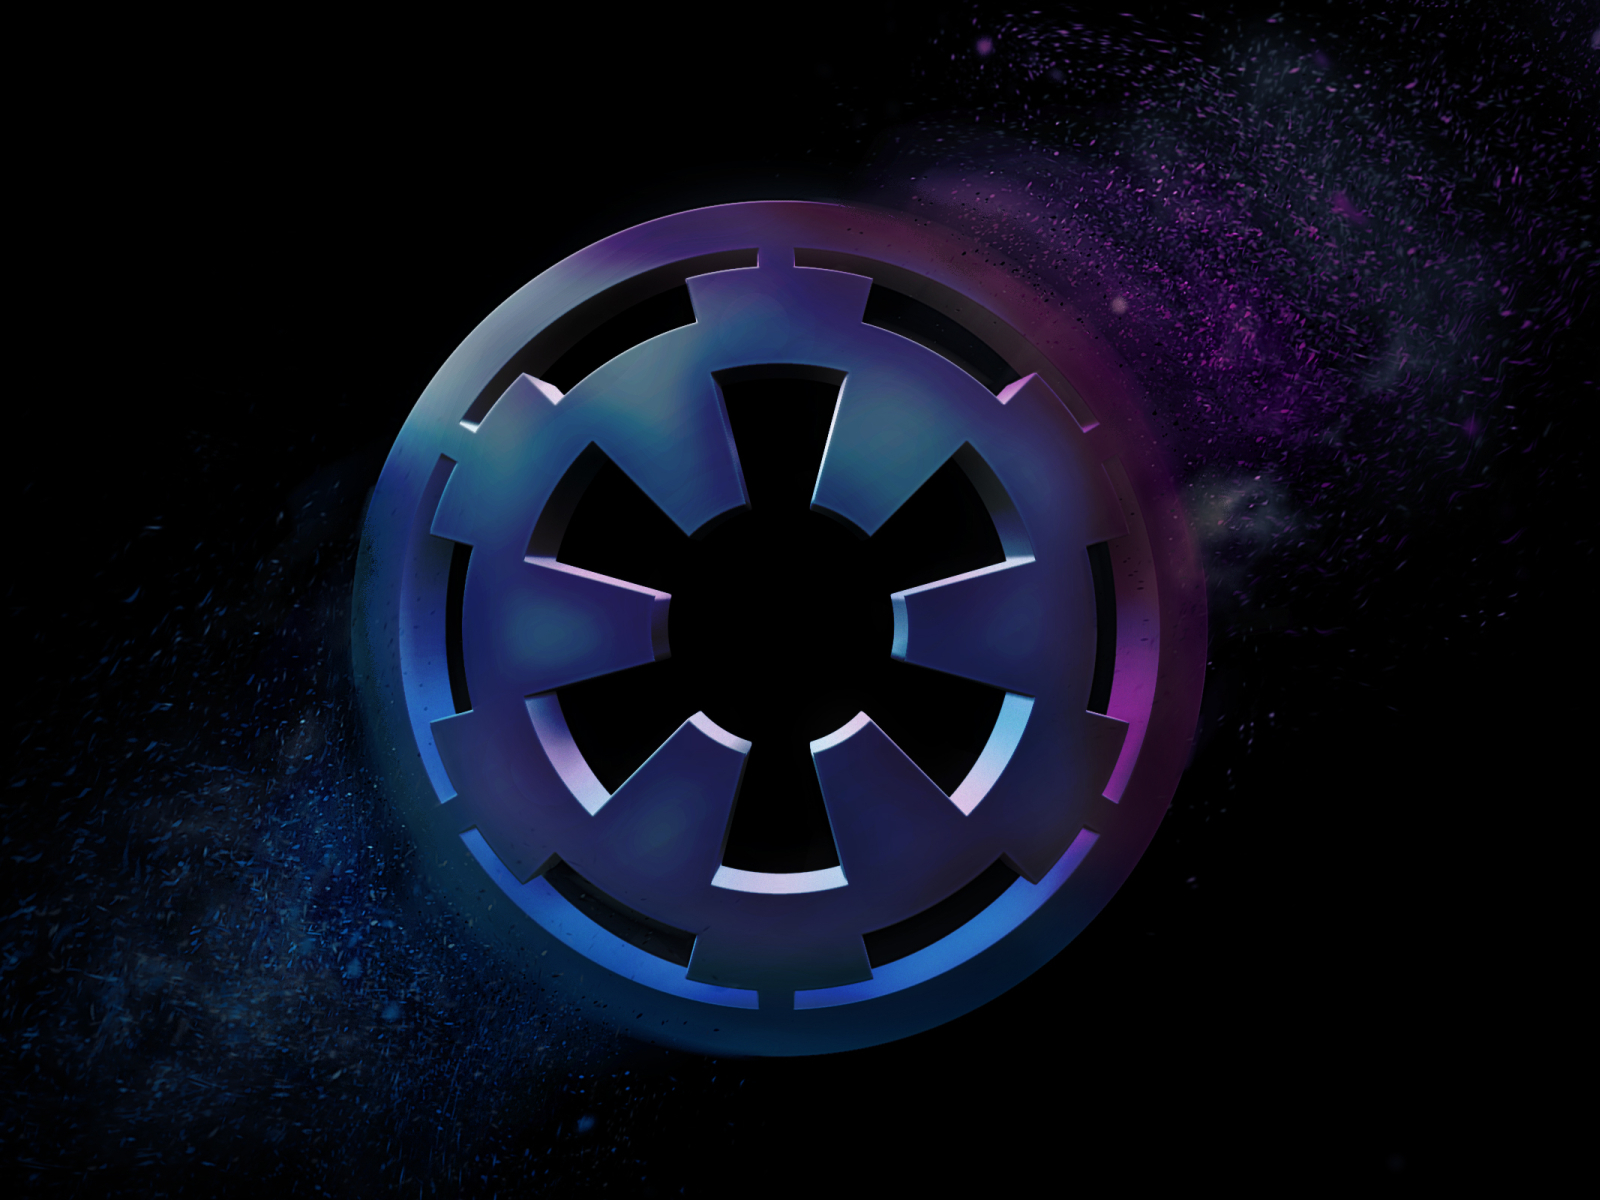 Star Wars Imperial 3d Logo Wallpaper by Rob Bock on Dribbble